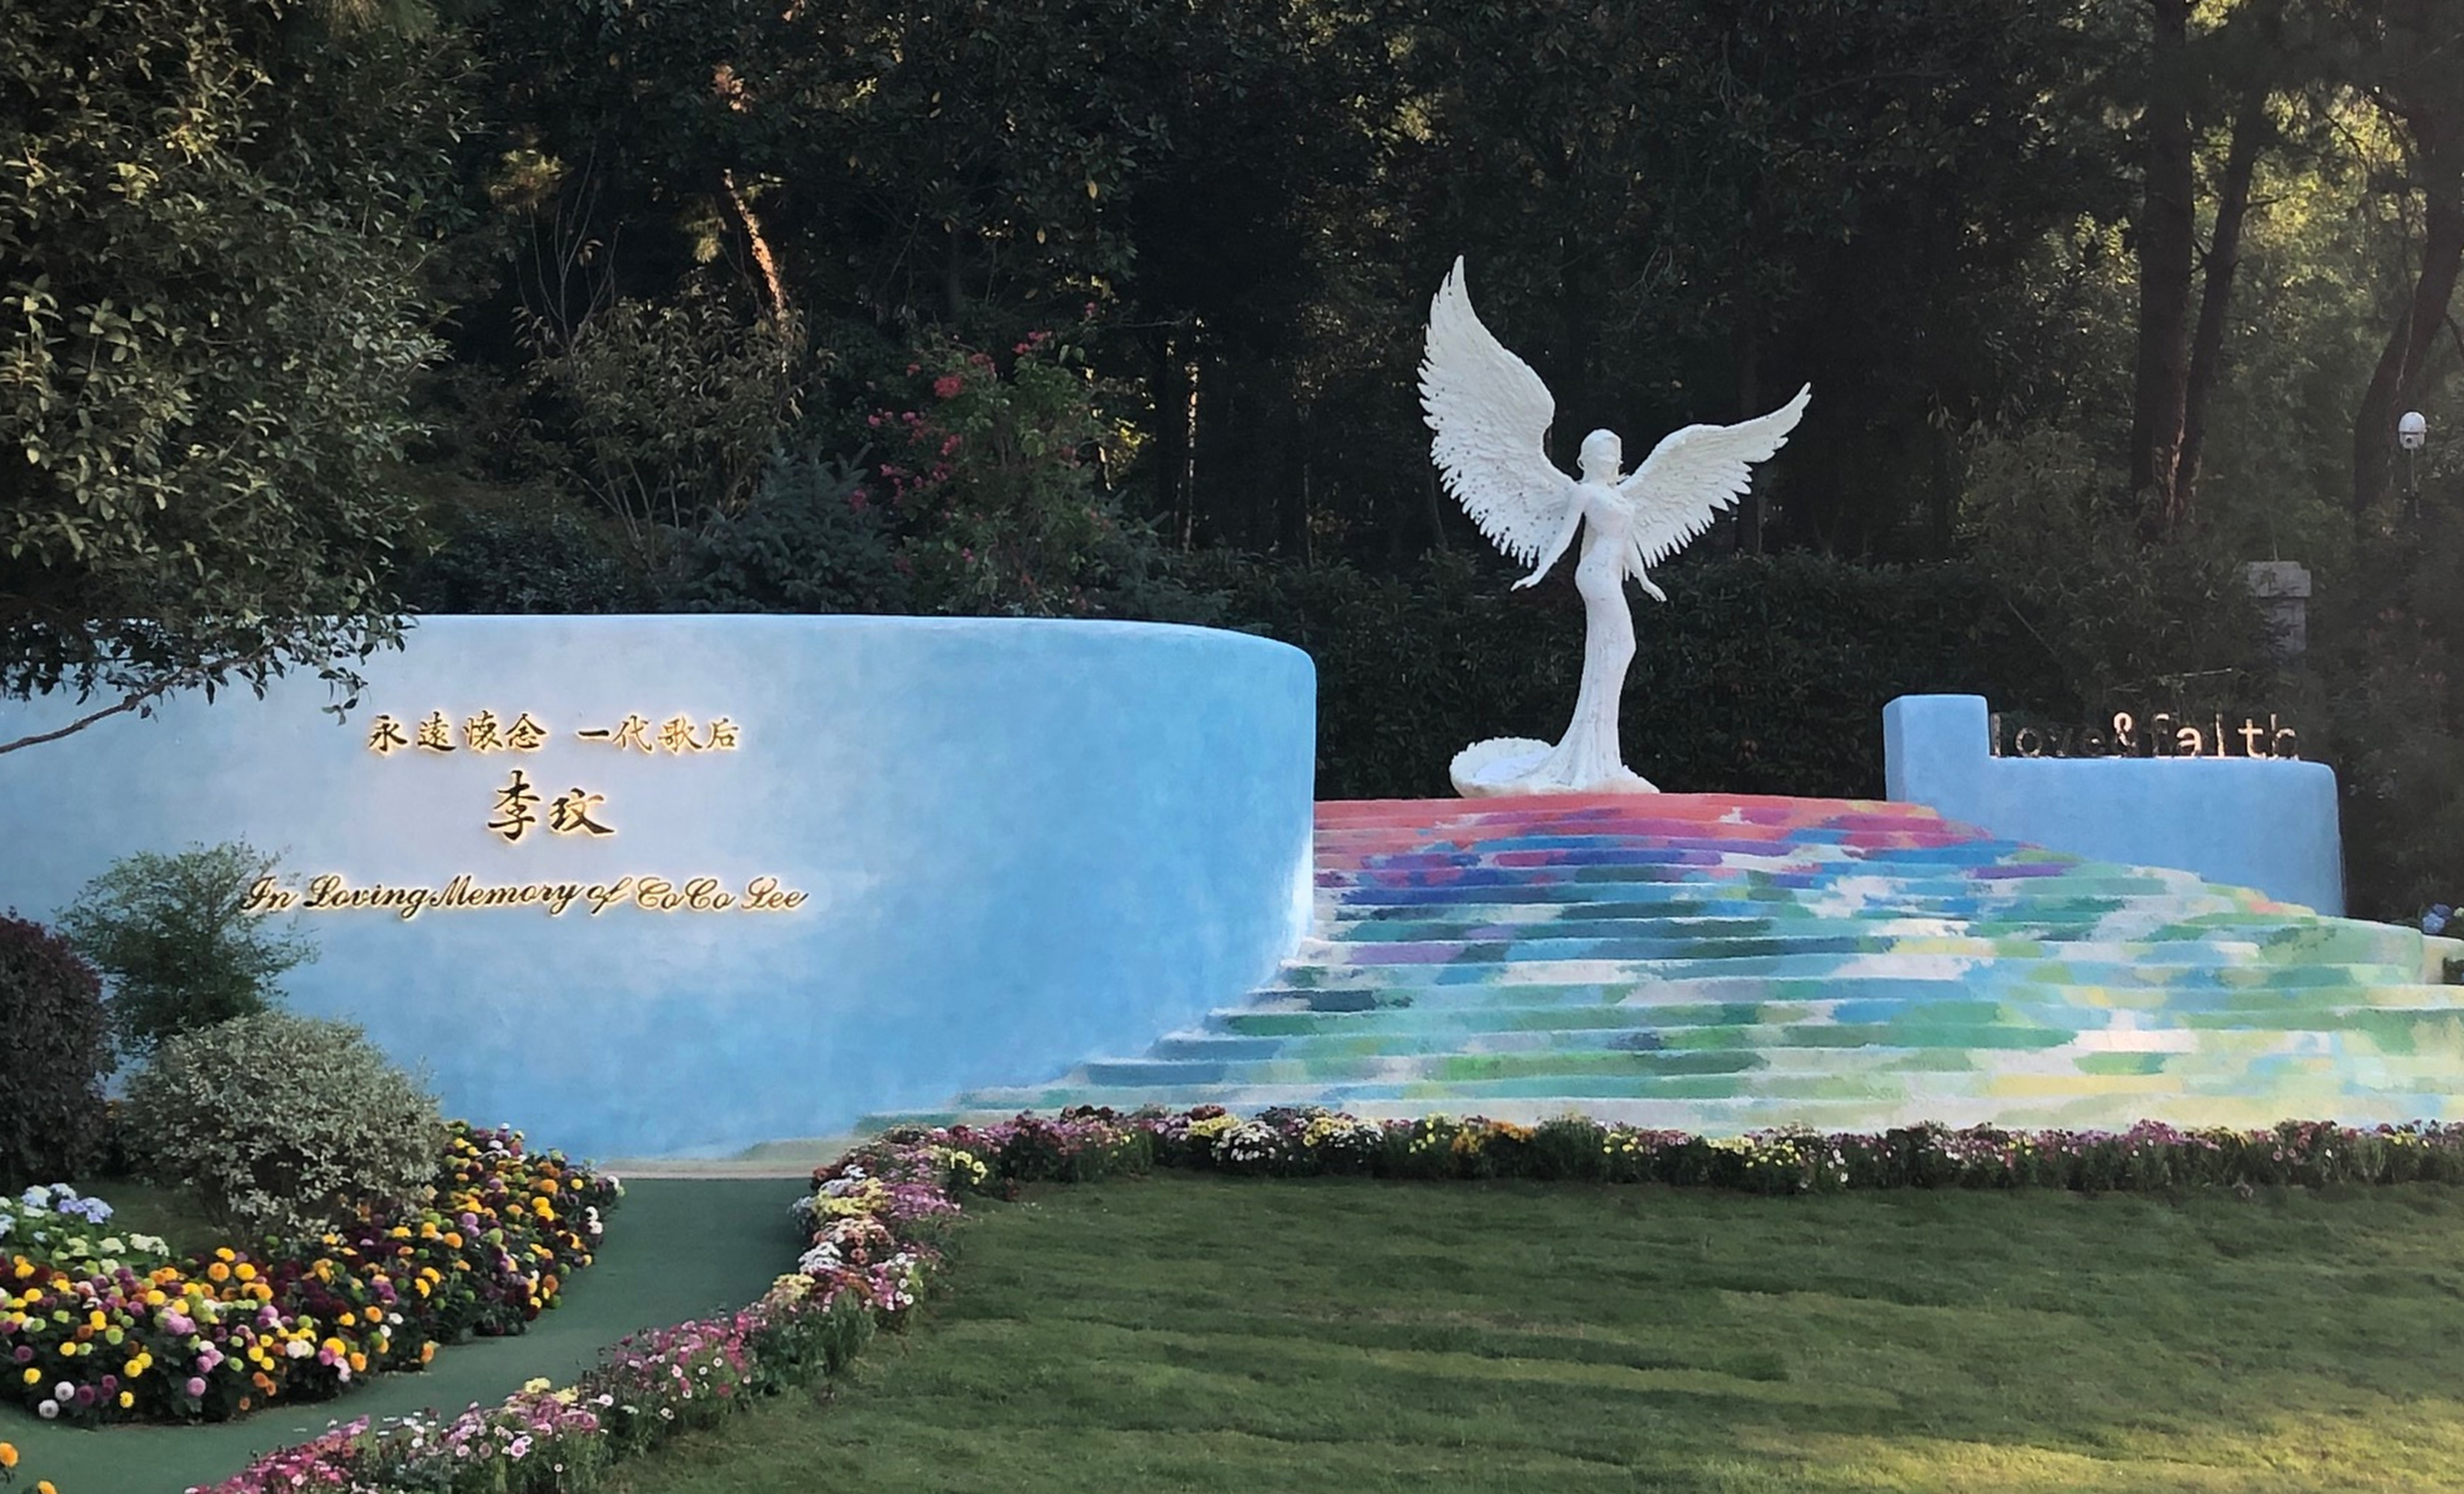 The Wuhan Shimen Peak Memorial Park in central China is the final resting place for Hong Kong-American pop singer Coco Lee, who died in July. Photo: Handout